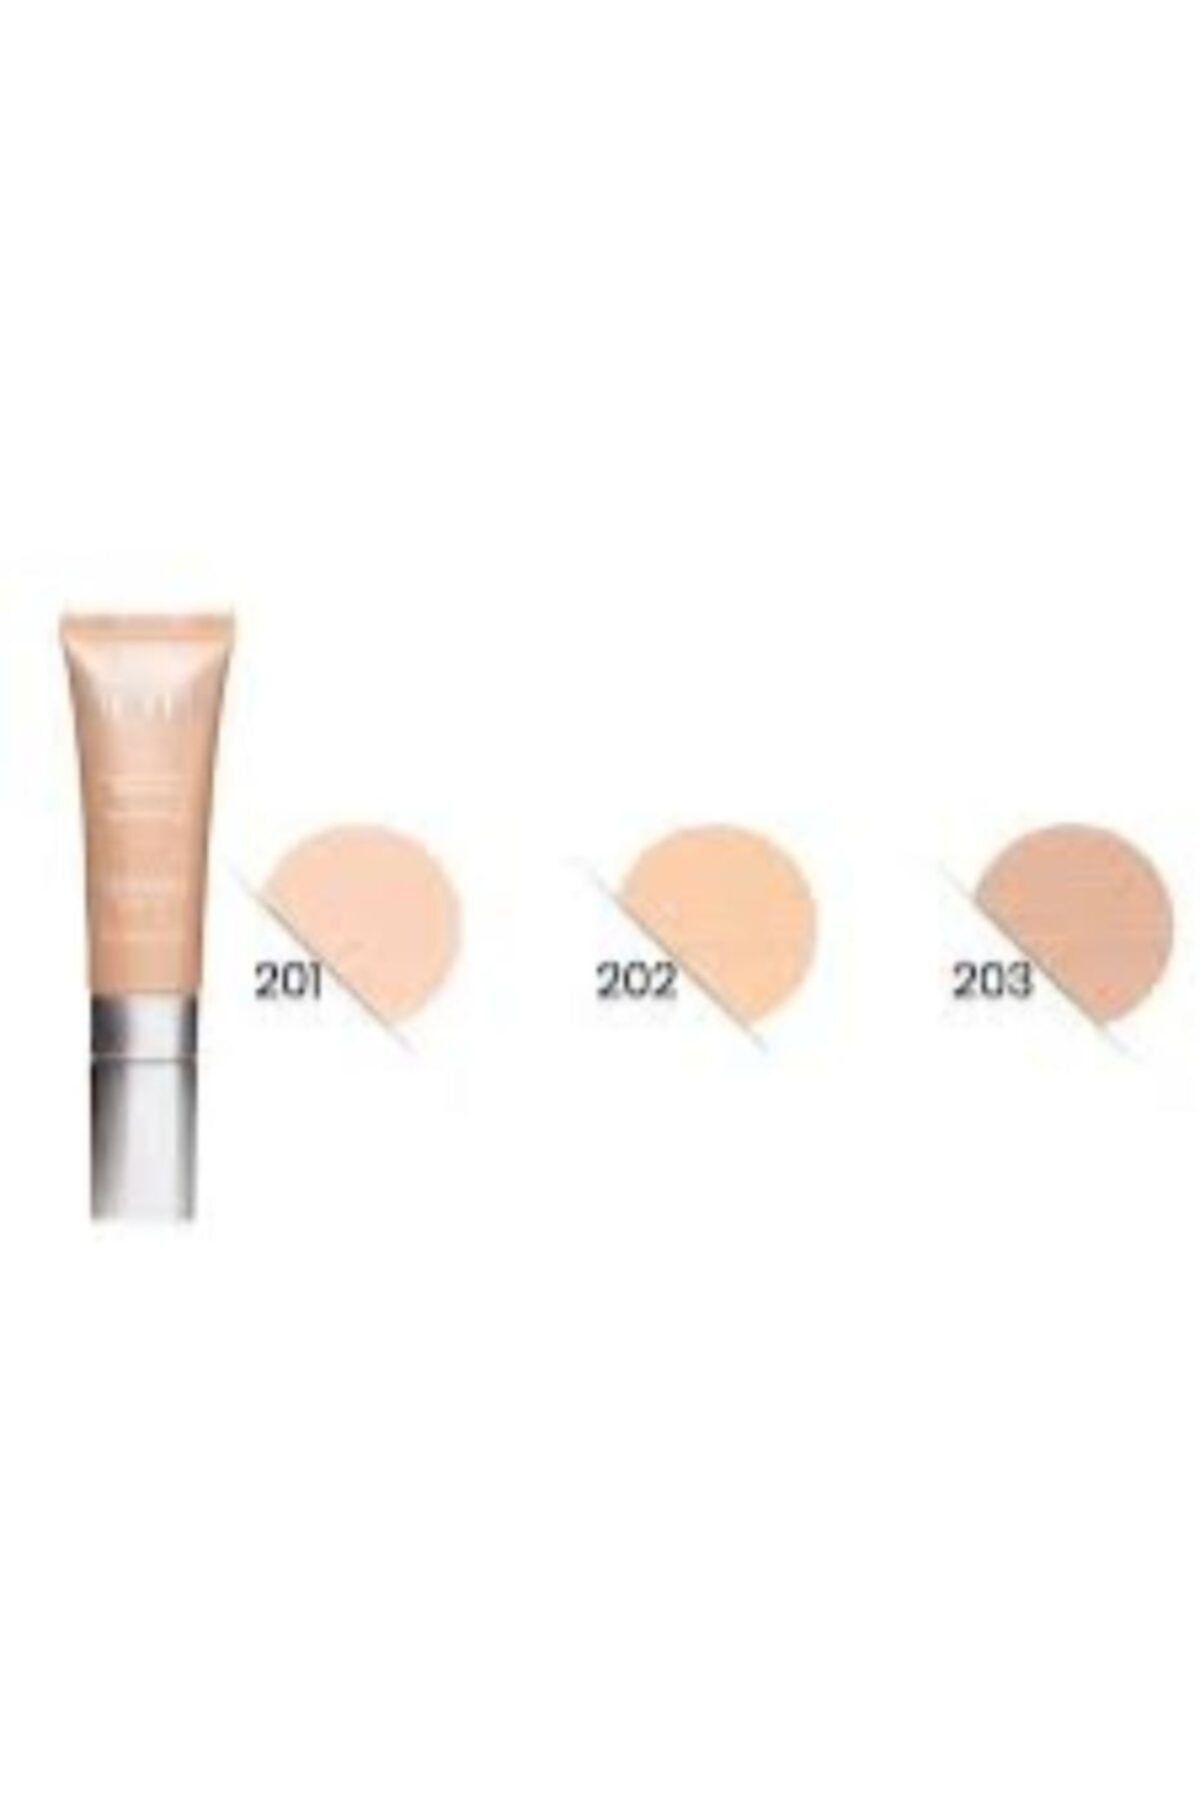 Note Cosmetics Mineral Spf 15 Concealer 202 -10 ml